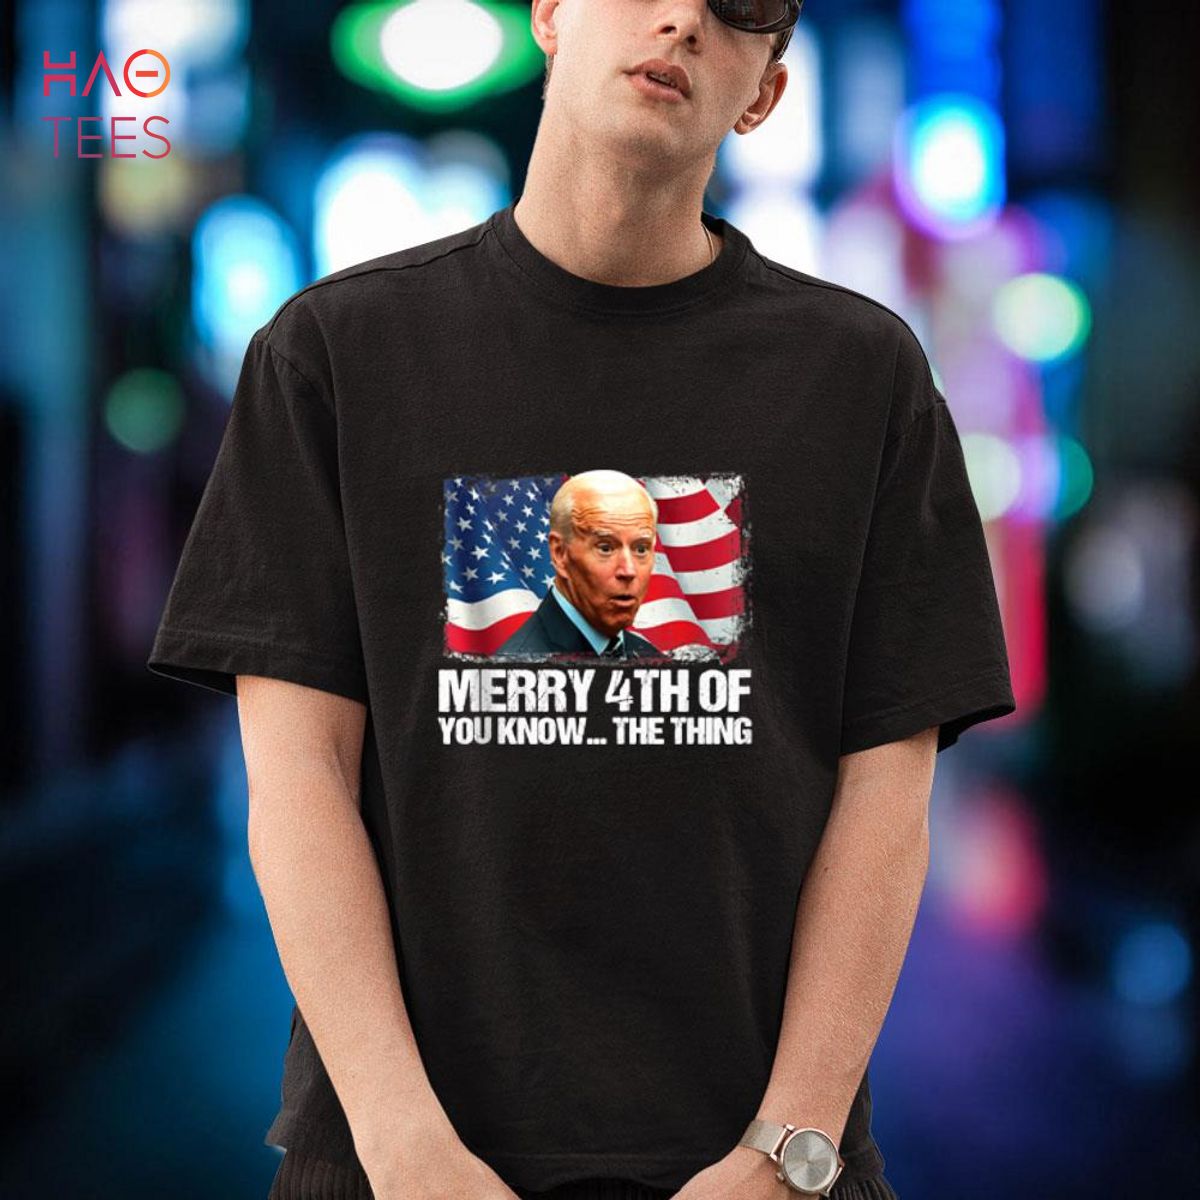 Joe Biden Merry 4th Of You Know…The Thing 4th Of July Shirt